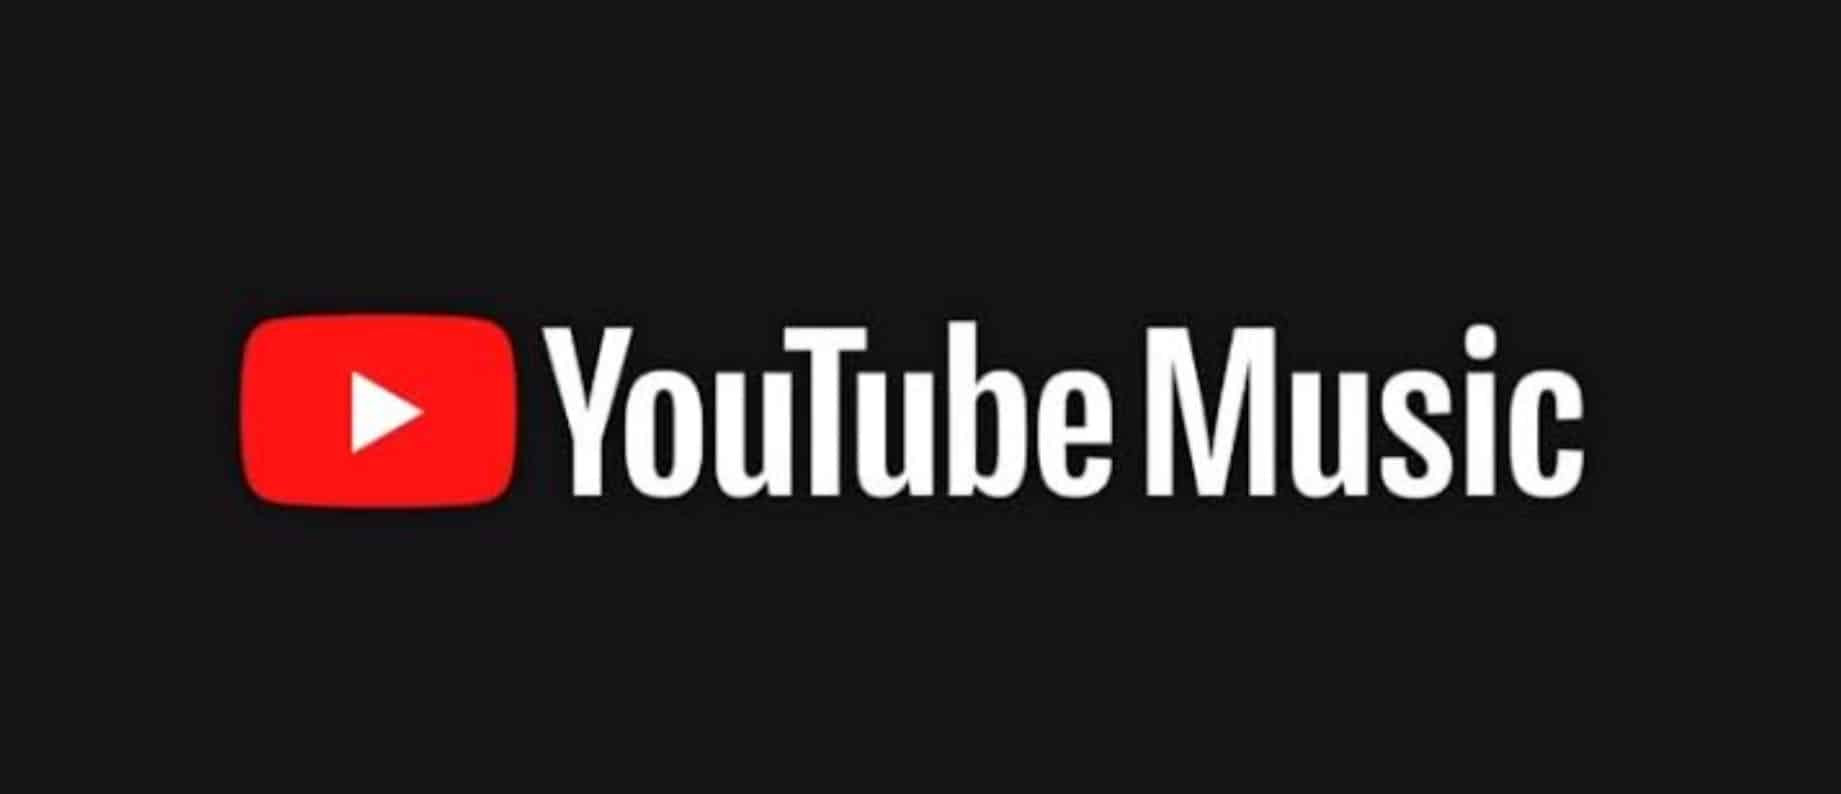 YouTube Music Now Lets You Play Songs Directly From Search on Android and iOS